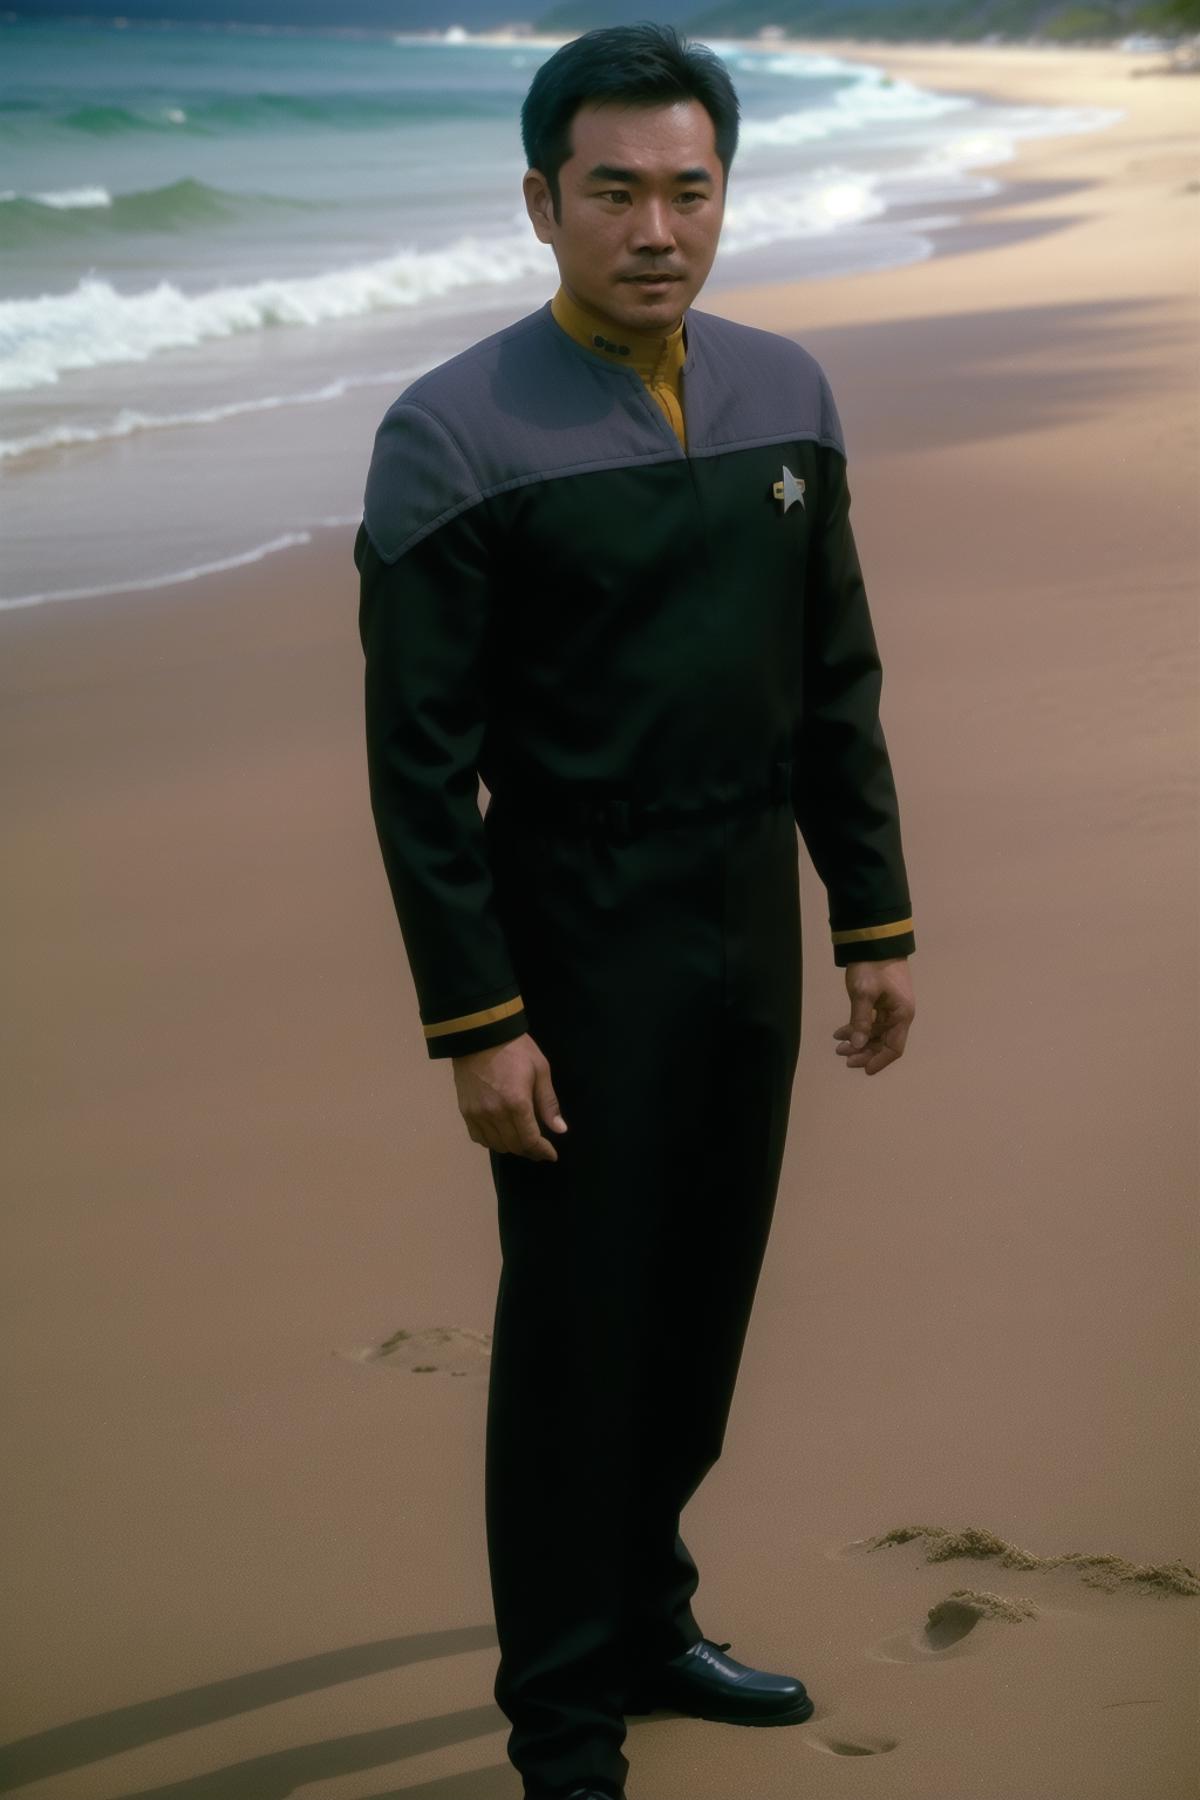 Star Trek DS9 uniforms image by impossiblebearcl4060